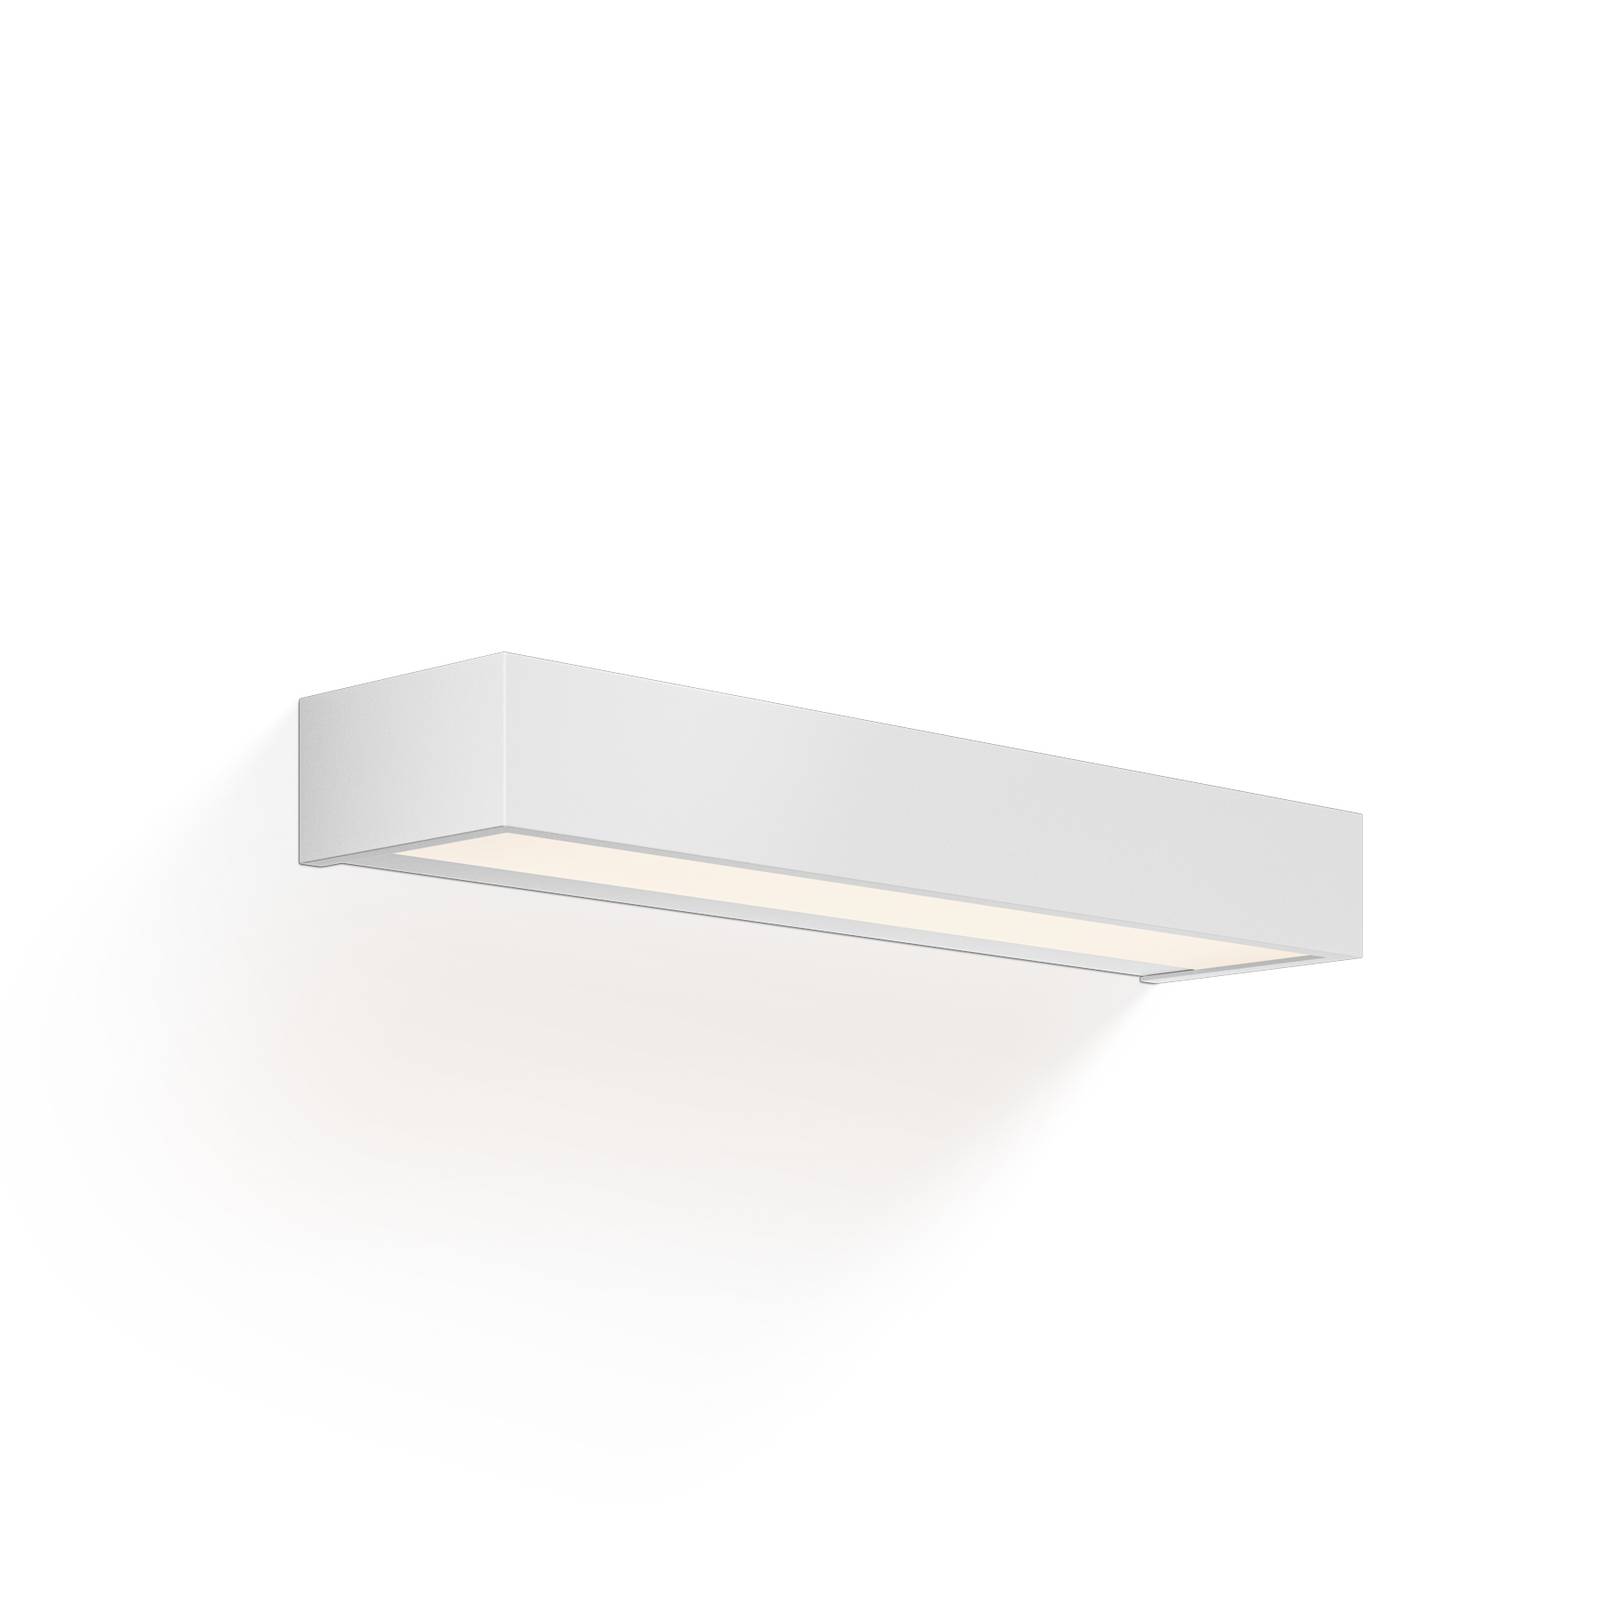 Image of Decor Walther Box 40 N applique LED, bianco satin